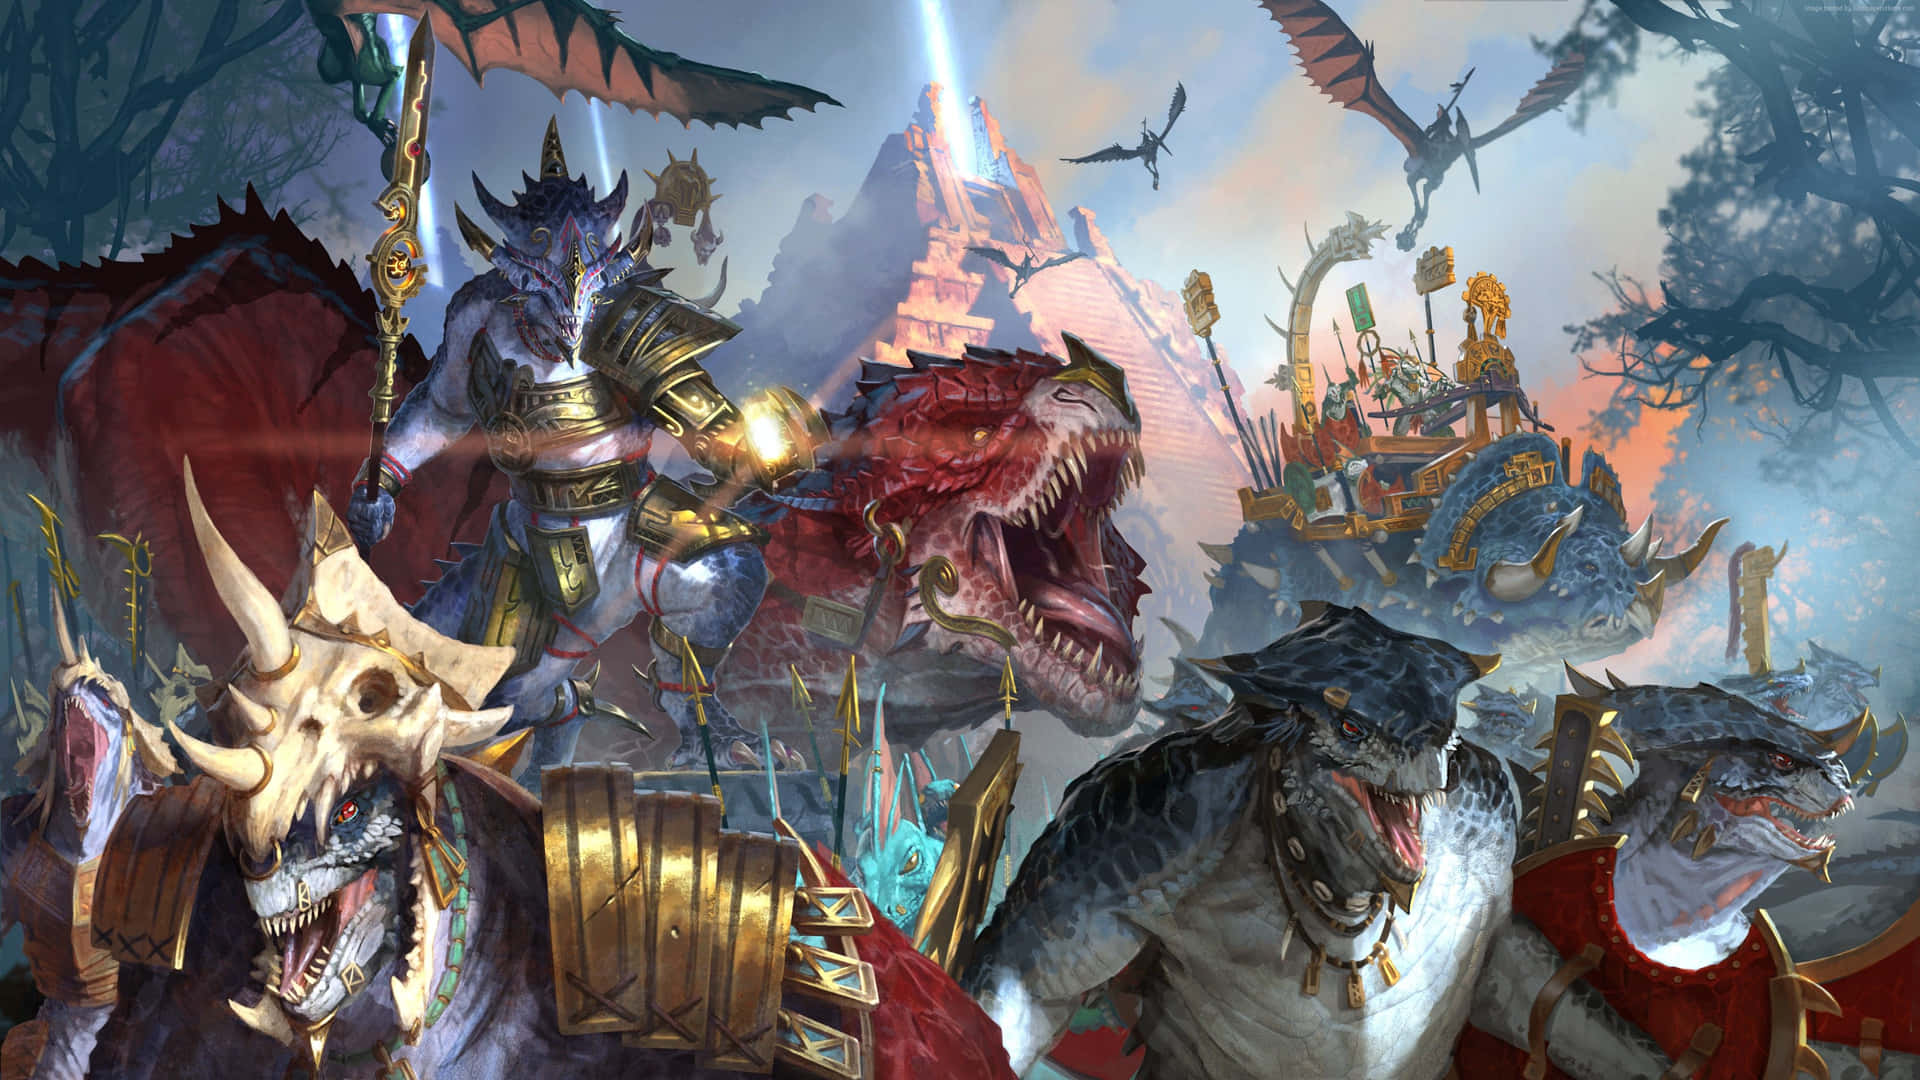 A Group Of Dragons And Other Creatures Are Standing In A Field